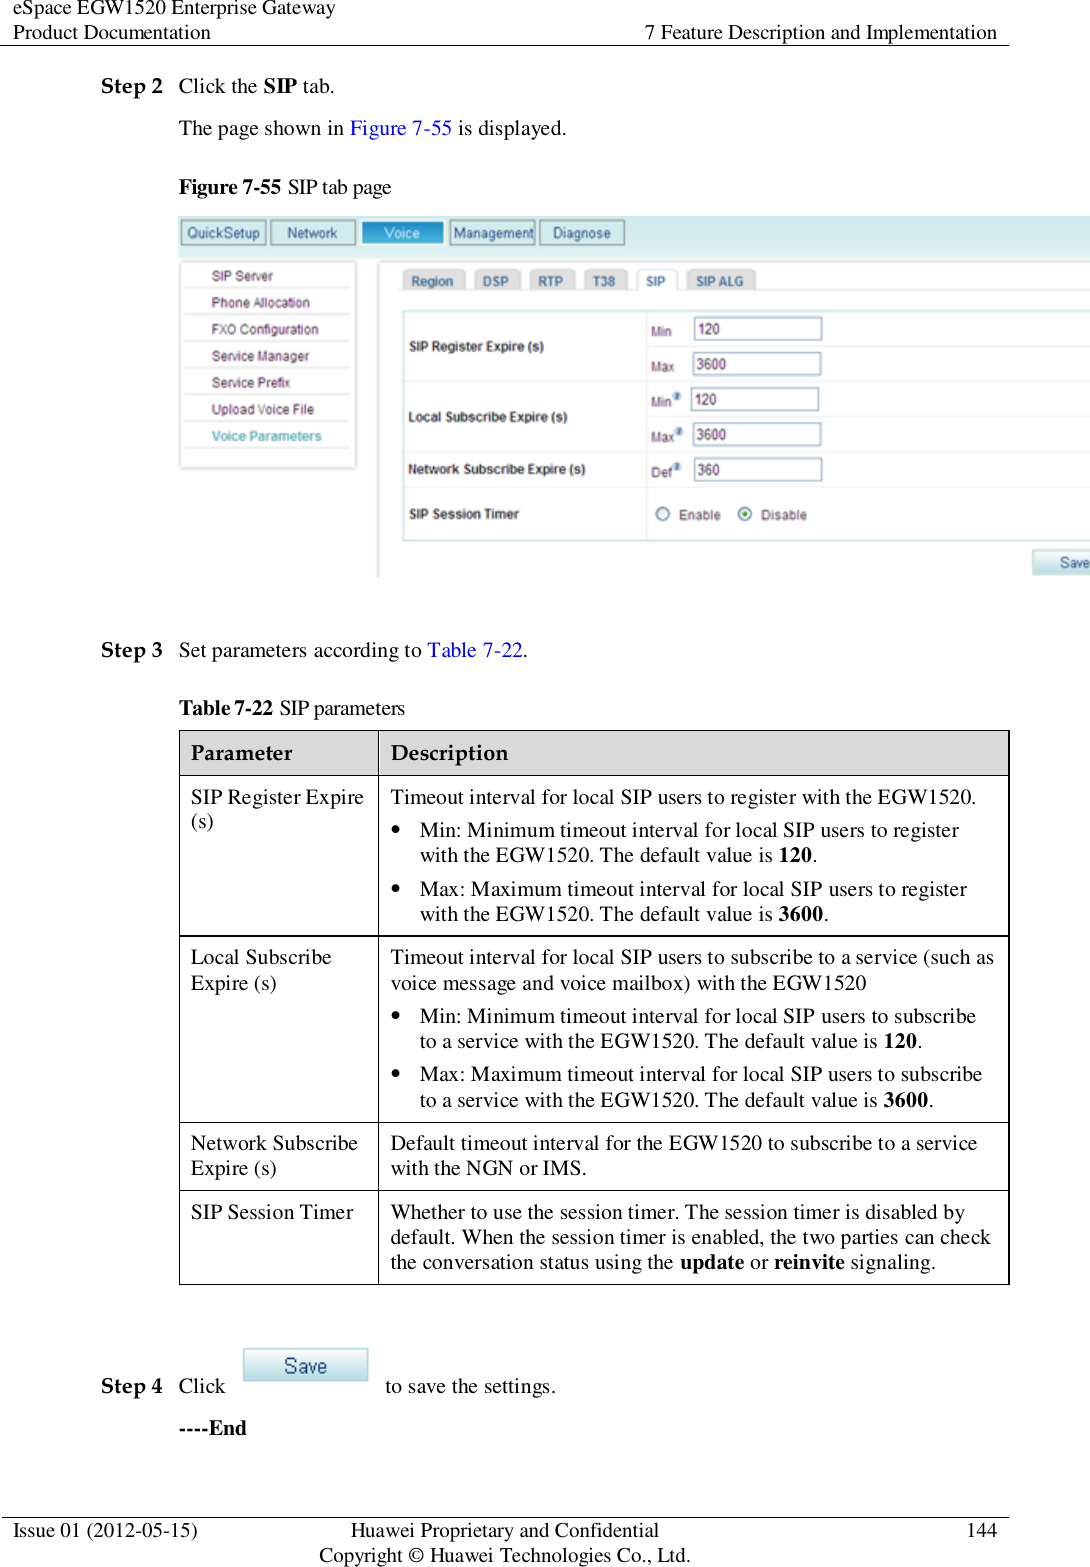 eSpace EGW1520 Enterprise Gateway Product Documentation 7 Feature Description and Implementation  Issue 01 (2012-05-15) Huawei Proprietary and Confidential                                     Copyright © Huawei Technologies Co., Ltd. 144  Step 2 Click the SIP tab. The page shown in Figure 7-55 is displayed. Figure 7-55 SIP tab page   Step 3 Set parameters according to Table 7-22. Table 7-22 SIP parameters Parameter Description SIP Register Expire (s) Timeout interval for local SIP users to register with the EGW1520.  Min: Minimum timeout interval for local SIP users to register with the EGW1520. The default value is 120.  Max: Maximum timeout interval for local SIP users to register with the EGW1520. The default value is 3600. Local Subscribe Expire (s) Timeout interval for local SIP users to subscribe to a service (such as voice message and voice mailbox) with the EGW1520  Min: Minimum timeout interval for local SIP users to subscribe to a service with the EGW1520. The default value is 120.  Max: Maximum timeout interval for local SIP users to subscribe to a service with the EGW1520. The default value is 3600. Network Subscribe Expire (s) Default timeout interval for the EGW1520 to subscribe to a service with the NGN or IMS. SIP Session Timer Whether to use the session timer. The session timer is disabled by default. When the session timer is enabled, the two parties can check the conversation status using the update or reinvite signaling.  Step 4 Click    to save the settings. ----End 